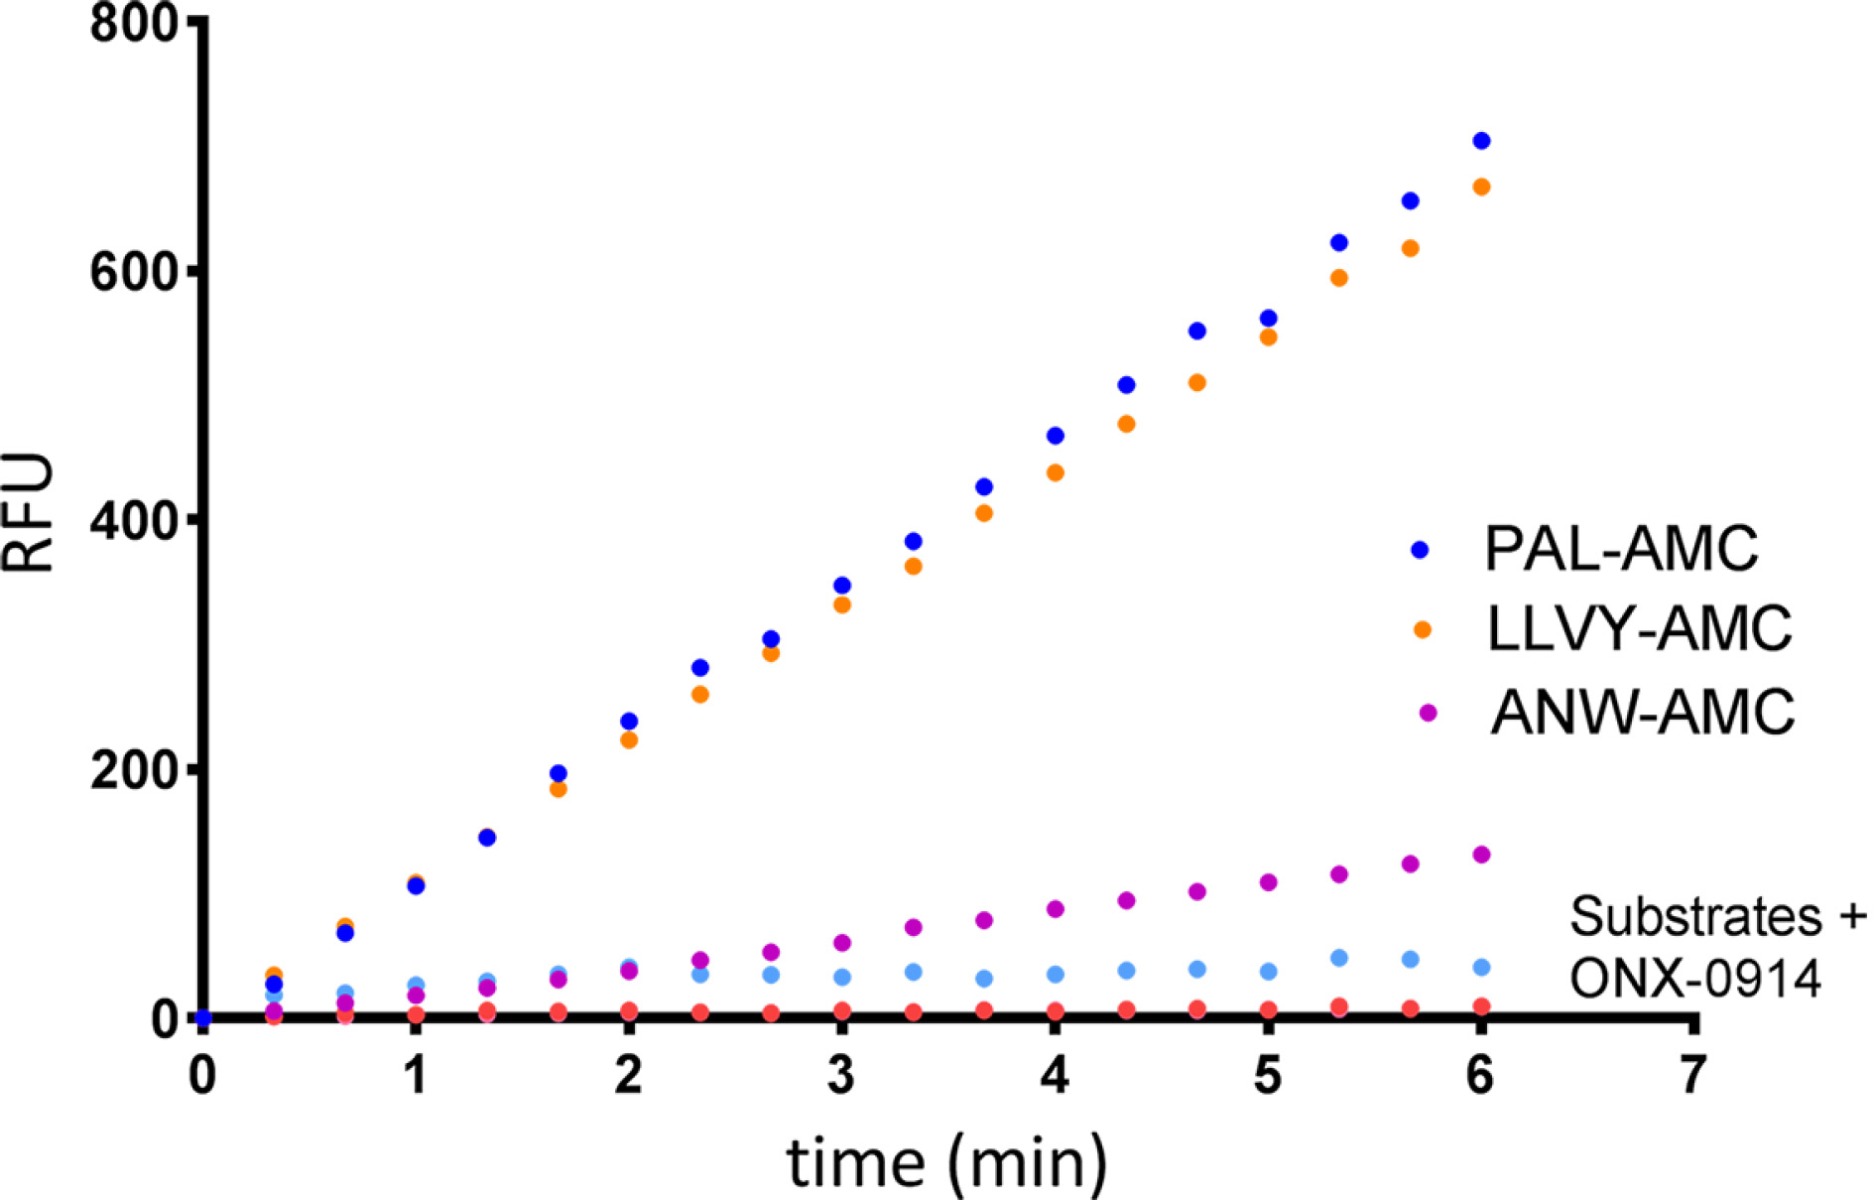 20S Immunoproteasome Activity Raw Data Output: Several wells of Immunoproteasome shown digesting LLVY, PAL, and ANW-AMC over time +/- 1x (40microM) inhibitor (ONX-0914).